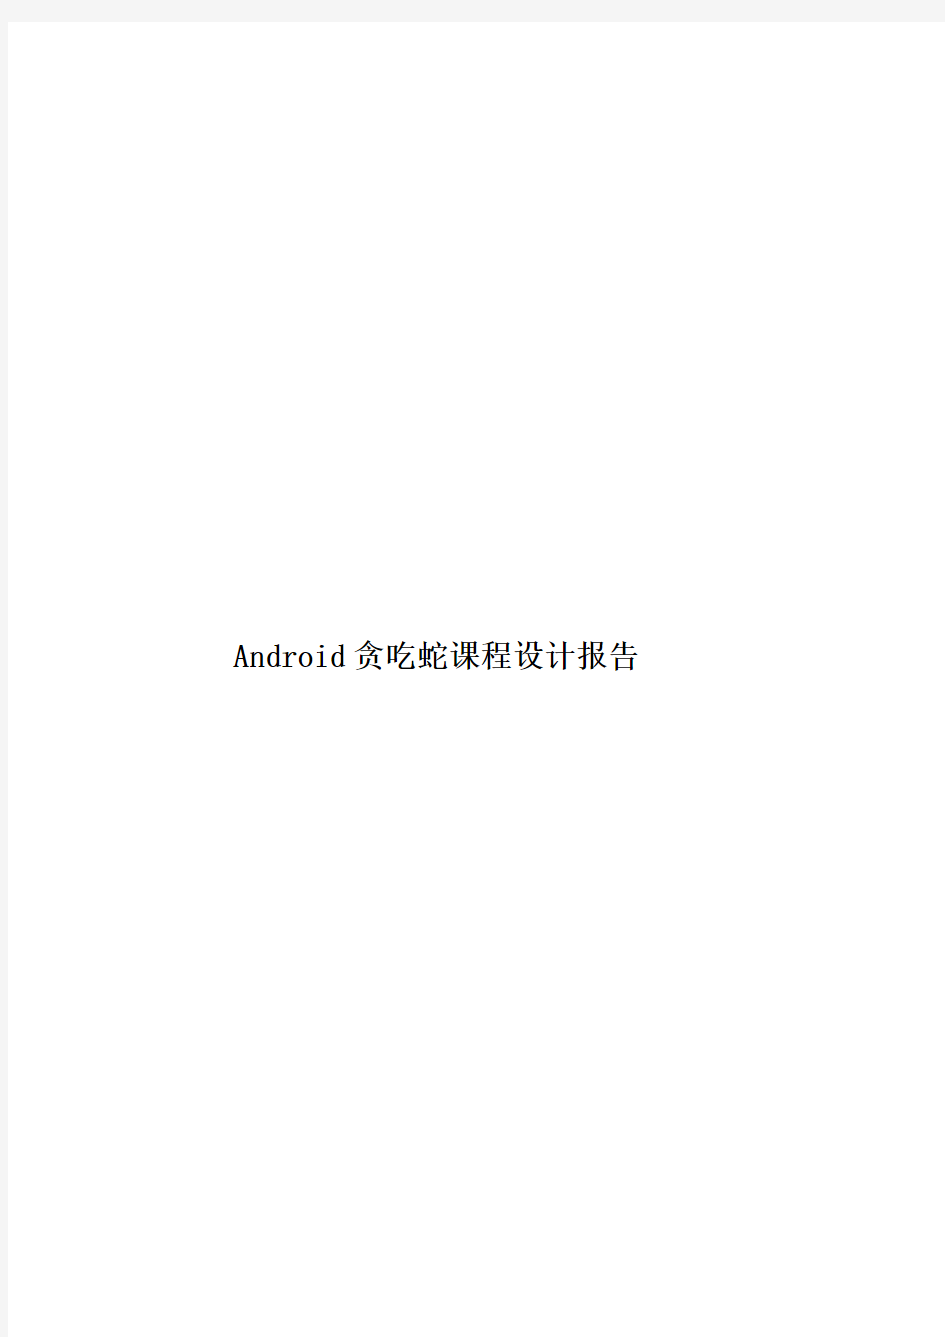 Android贪吃蛇课程设计报告